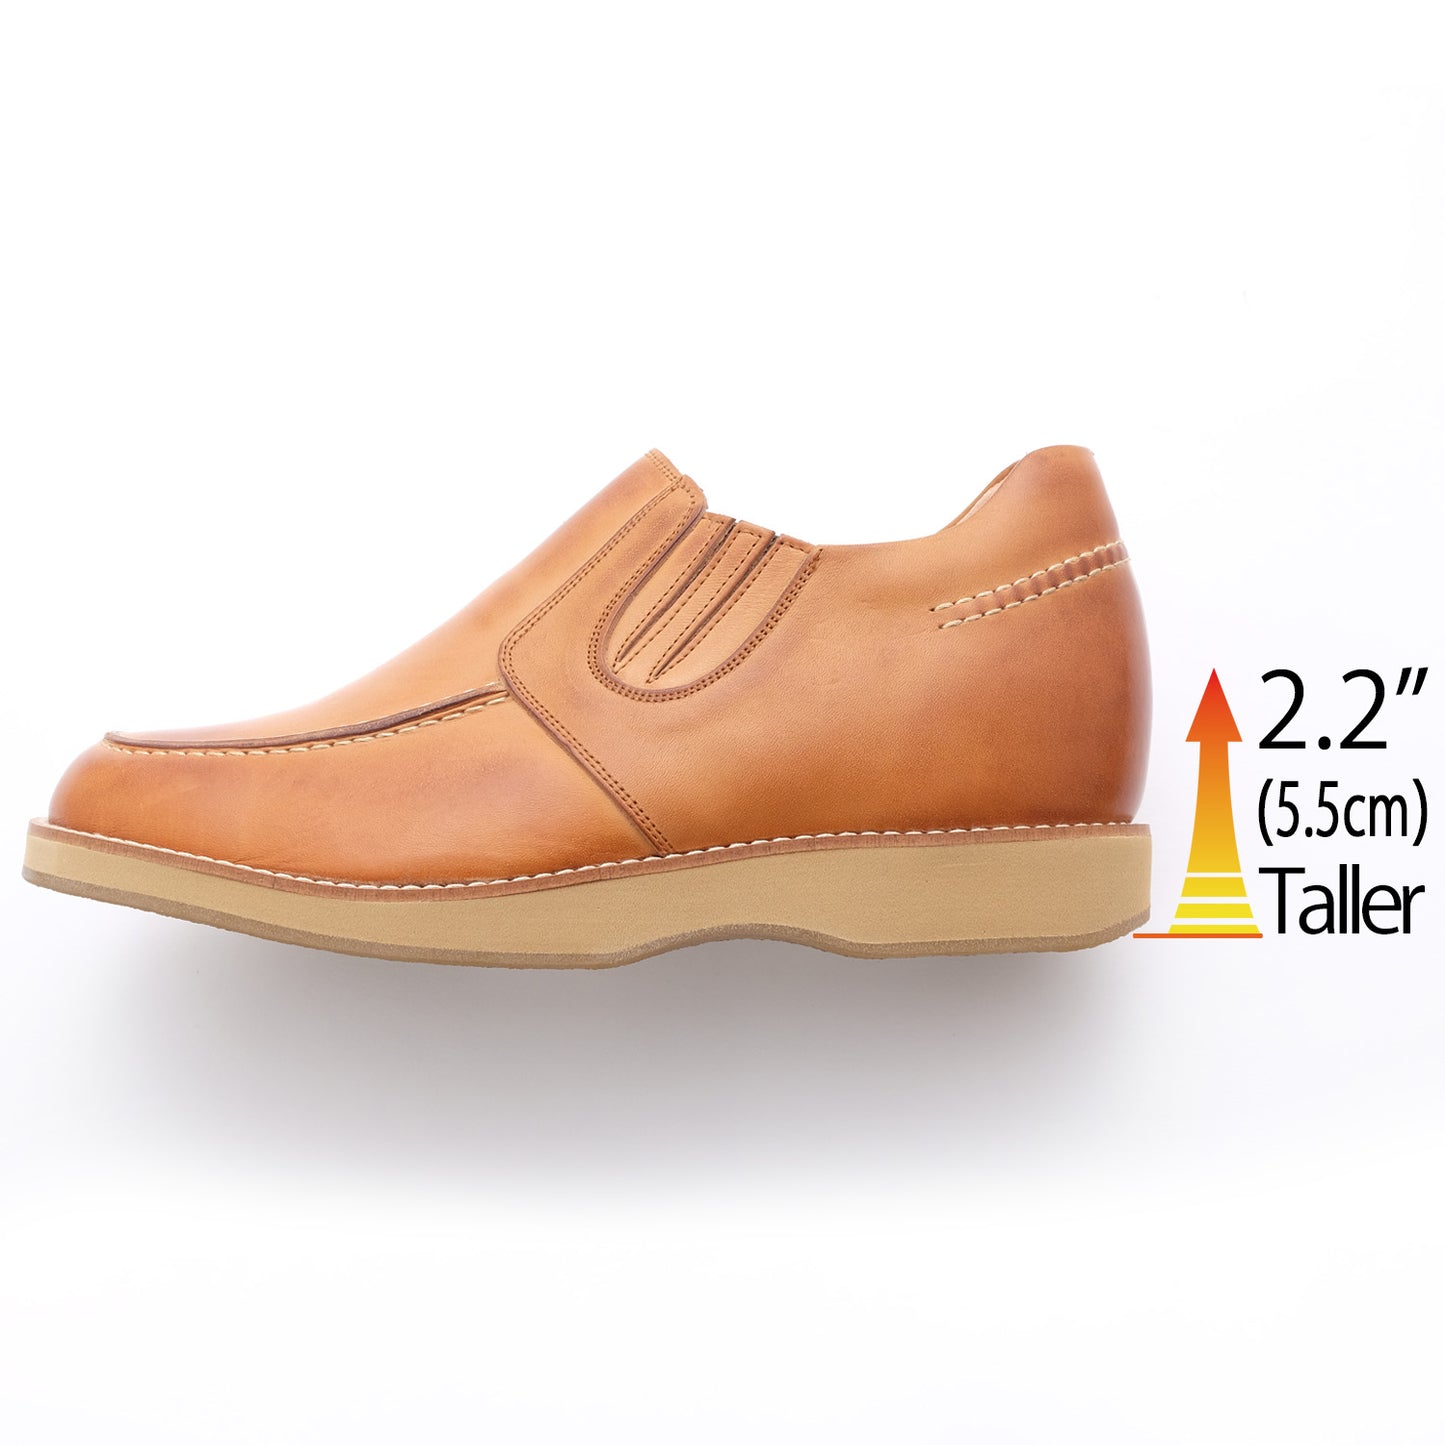 Men's Elevator Shoes Height Increasing 2.2" Taller Slip-on Side Gore Loafer Genuine Leather No. 523